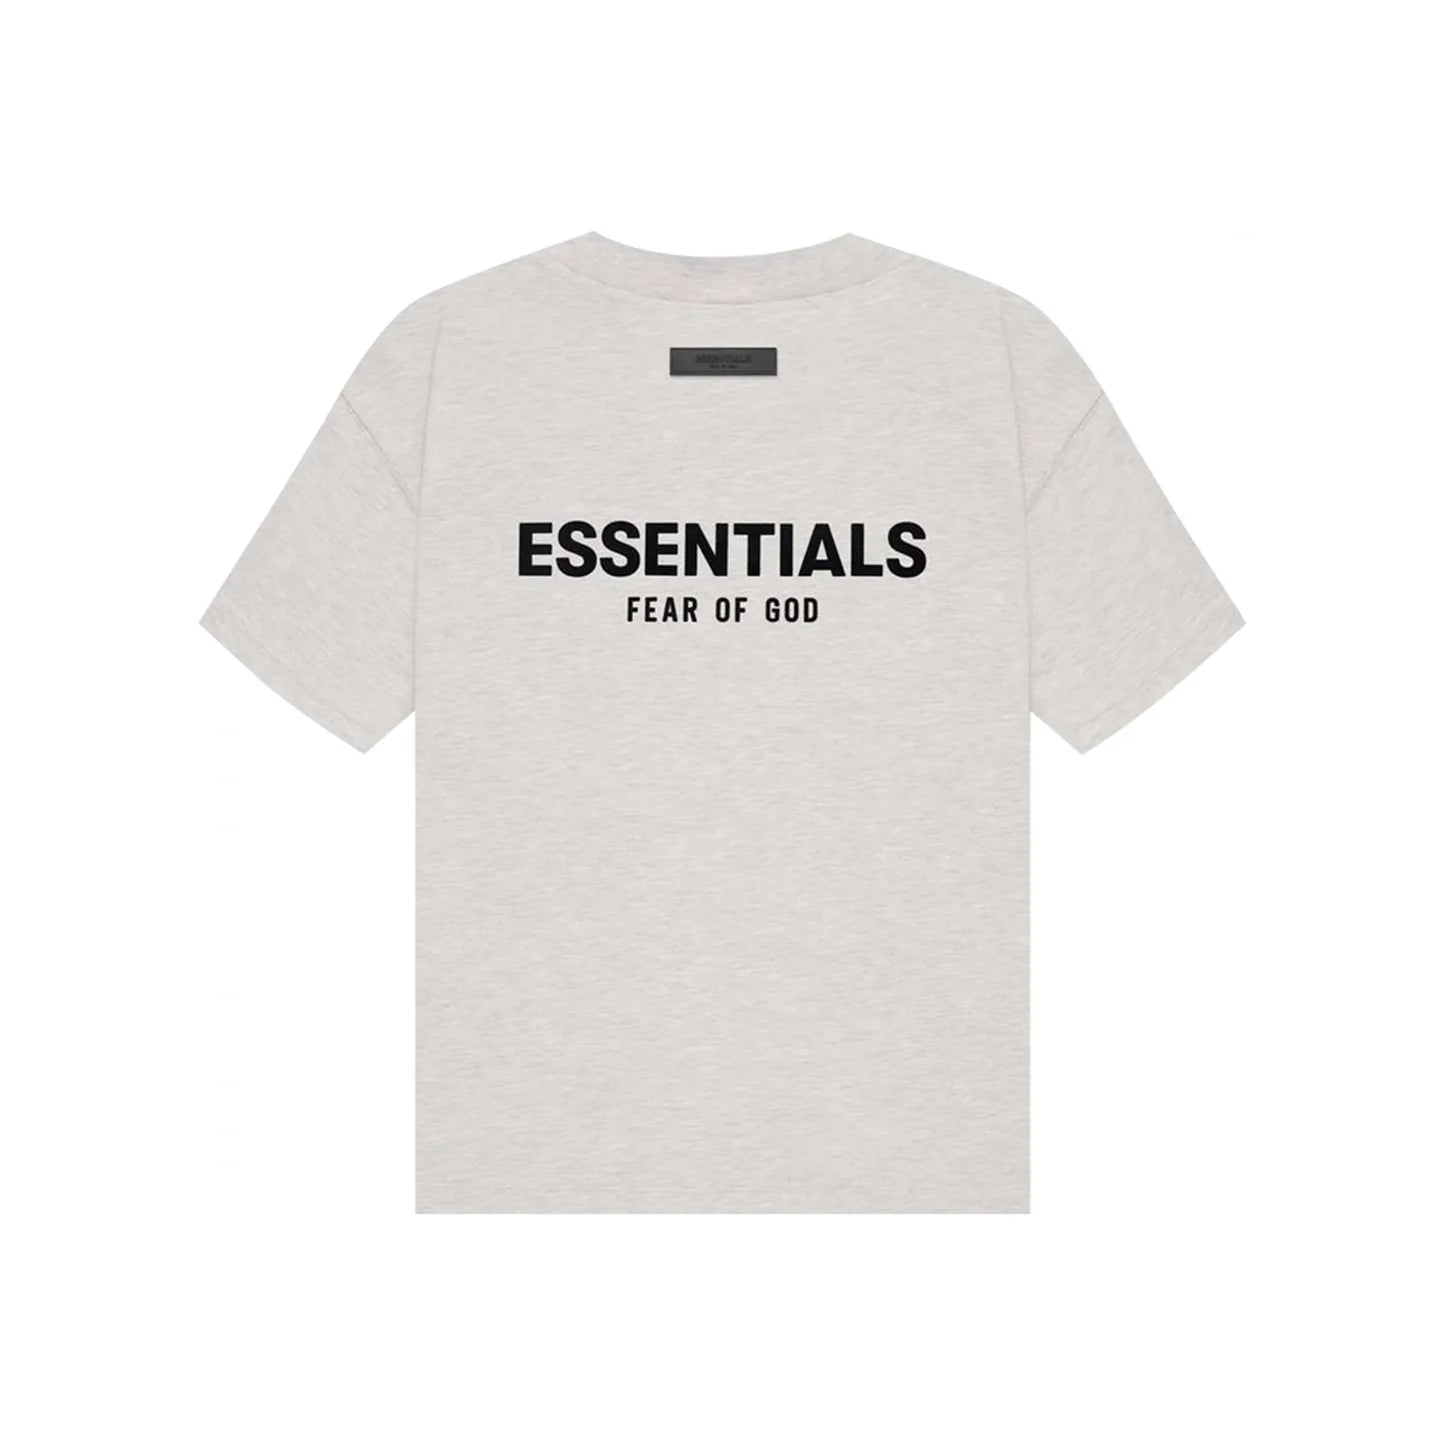 Fear of God Essentials 2022 Collection Light Oatmeal Set